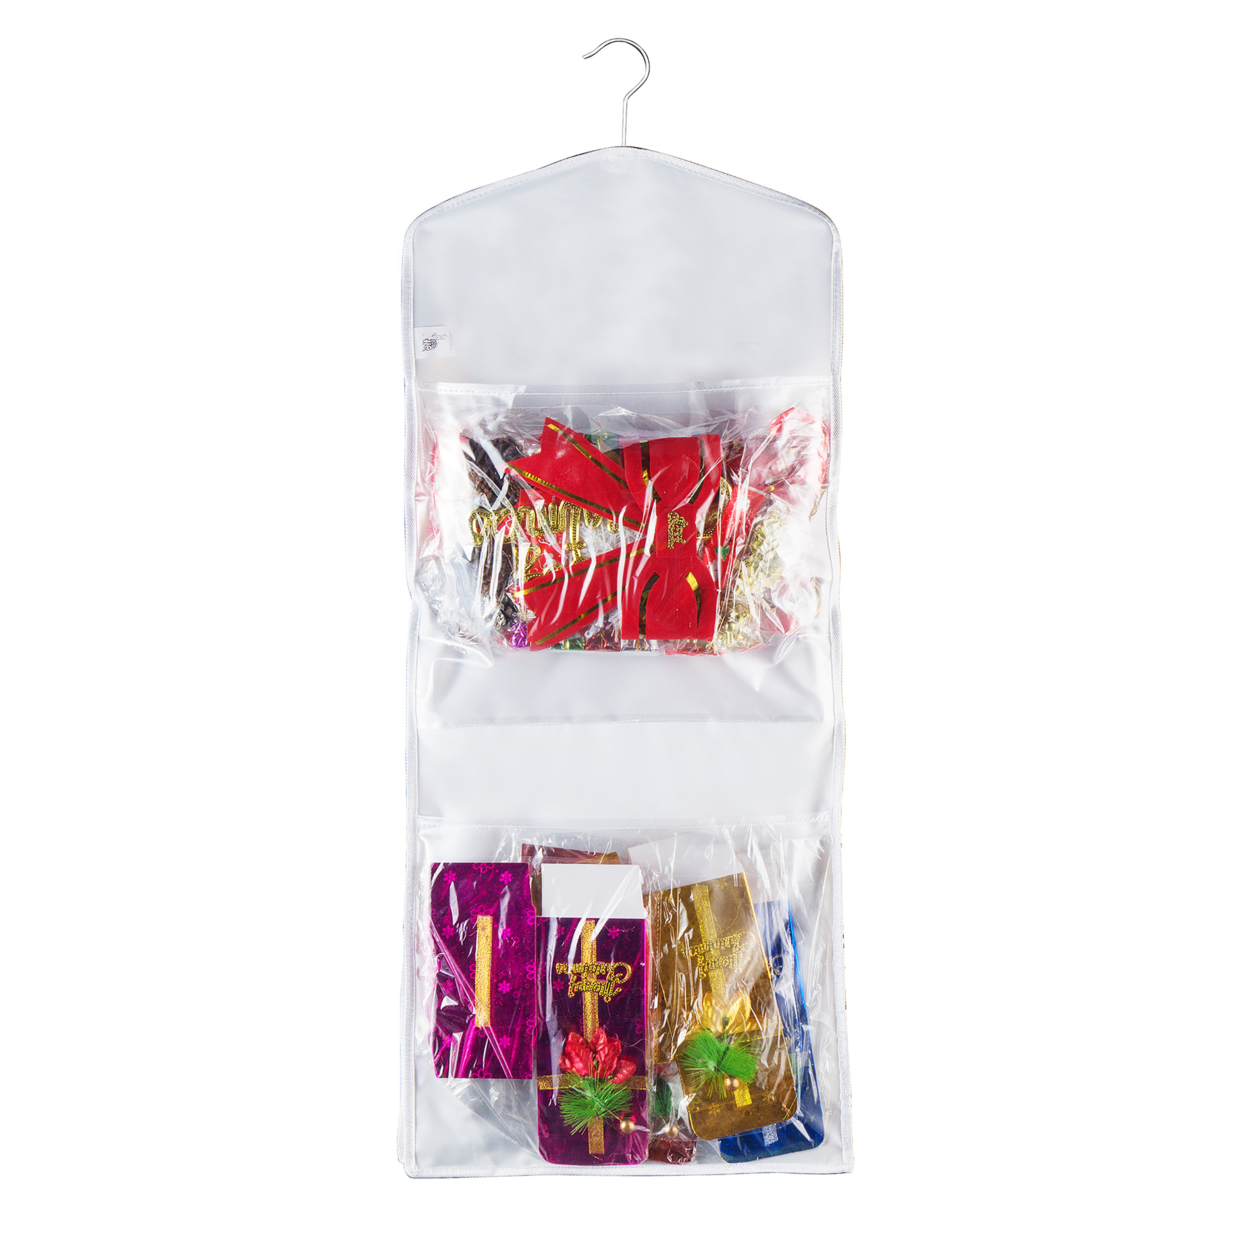 Double Sided Deluxe Hanging Gift Wrap Station Bag Organizer For Closet Or Home